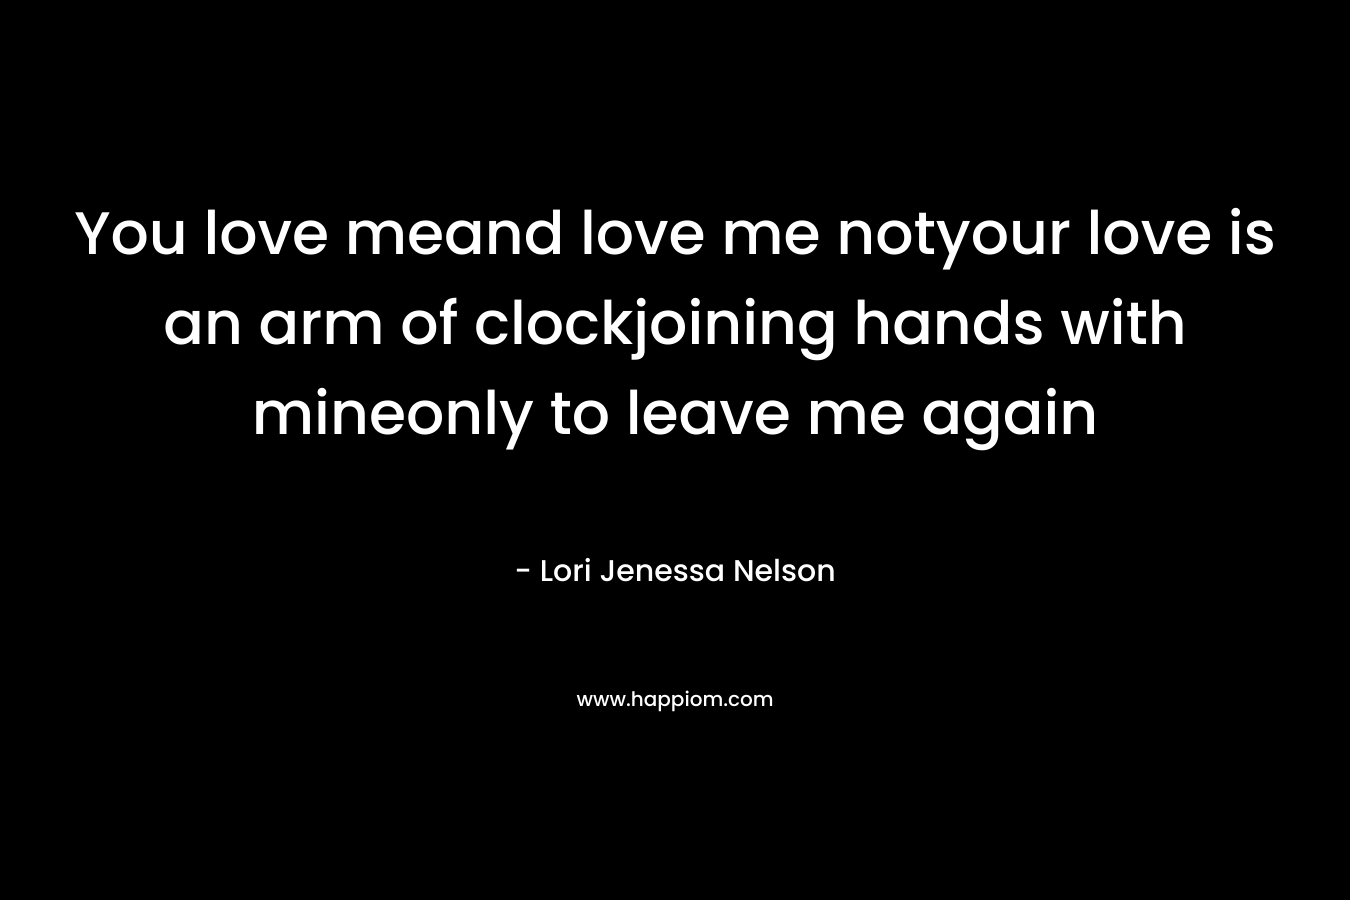 You love meand love me notyour love is an arm of clockjoining hands with mineonly to leave me again